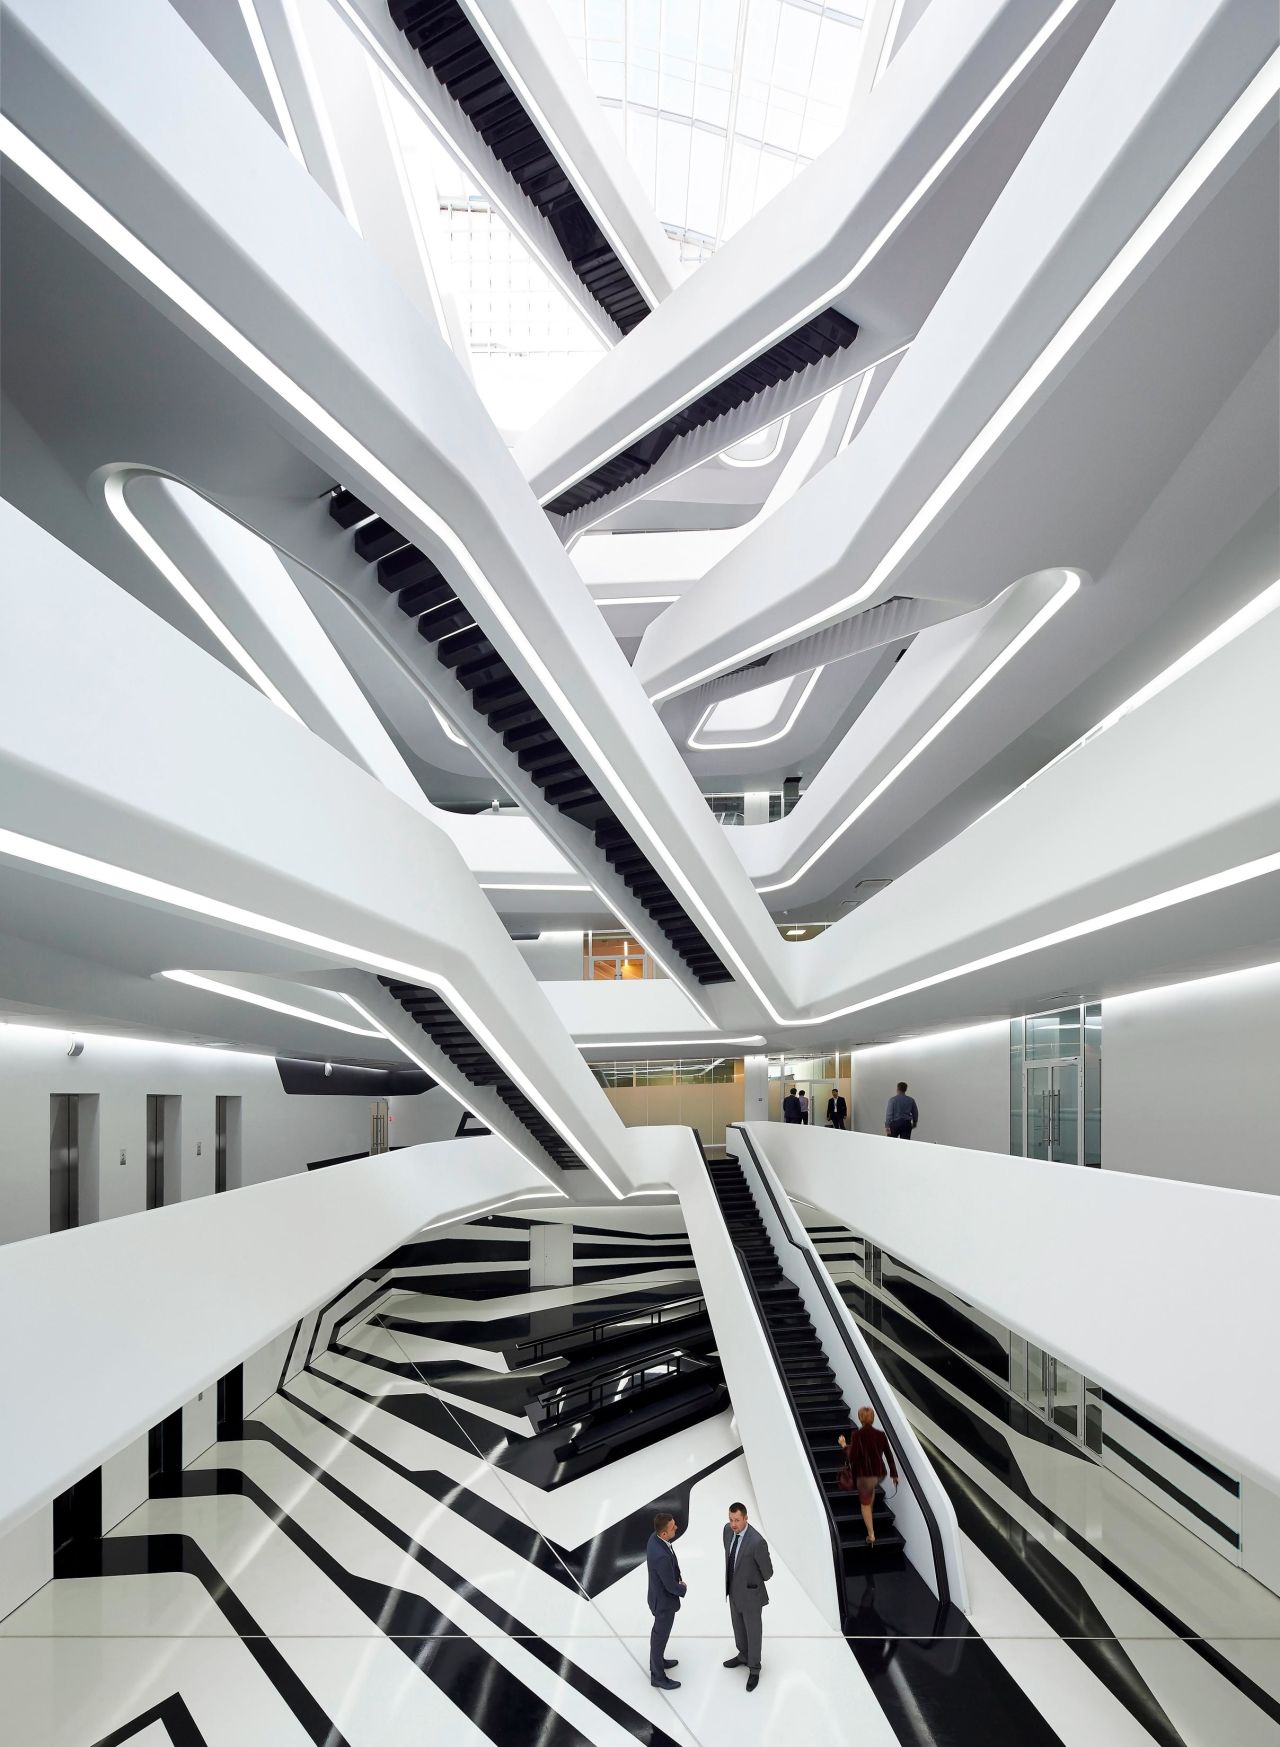 A central atrium rises through the center of the building, with interconnected staircases joining the indoor balconies. Natural light floods in from the glass roof.